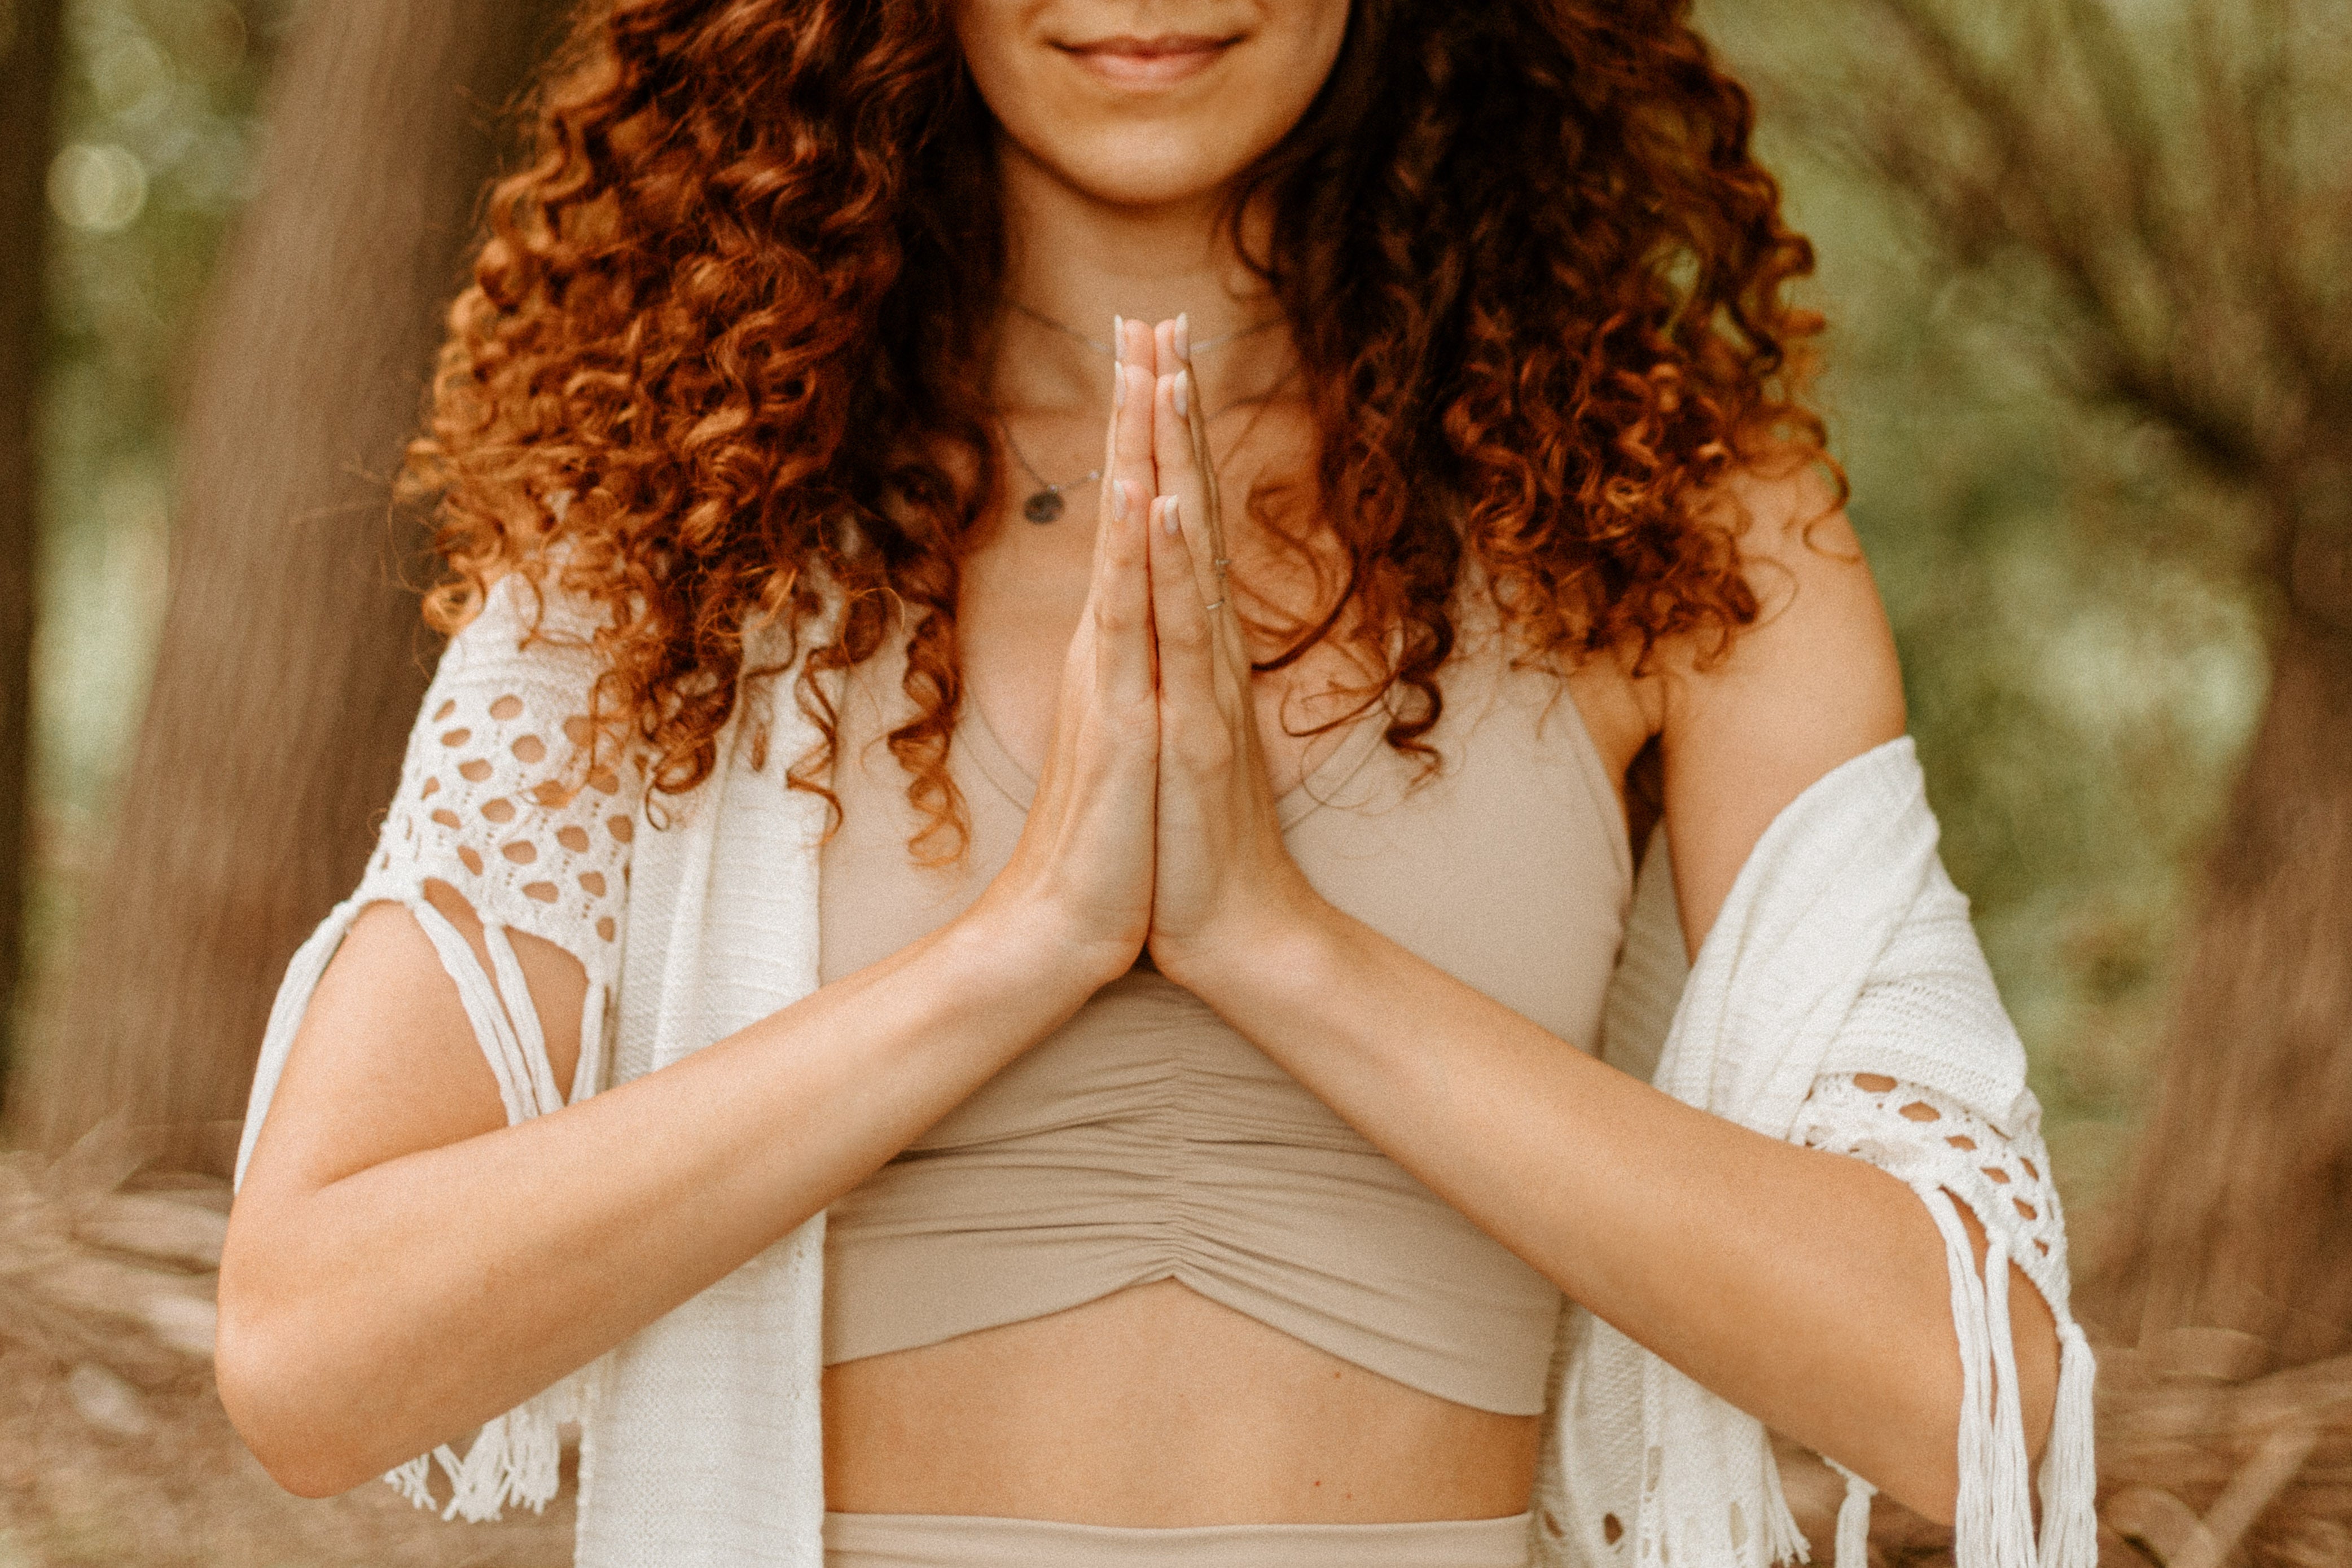 Yoga For New Beginnings: Staying Grounded While Going Through a Transition